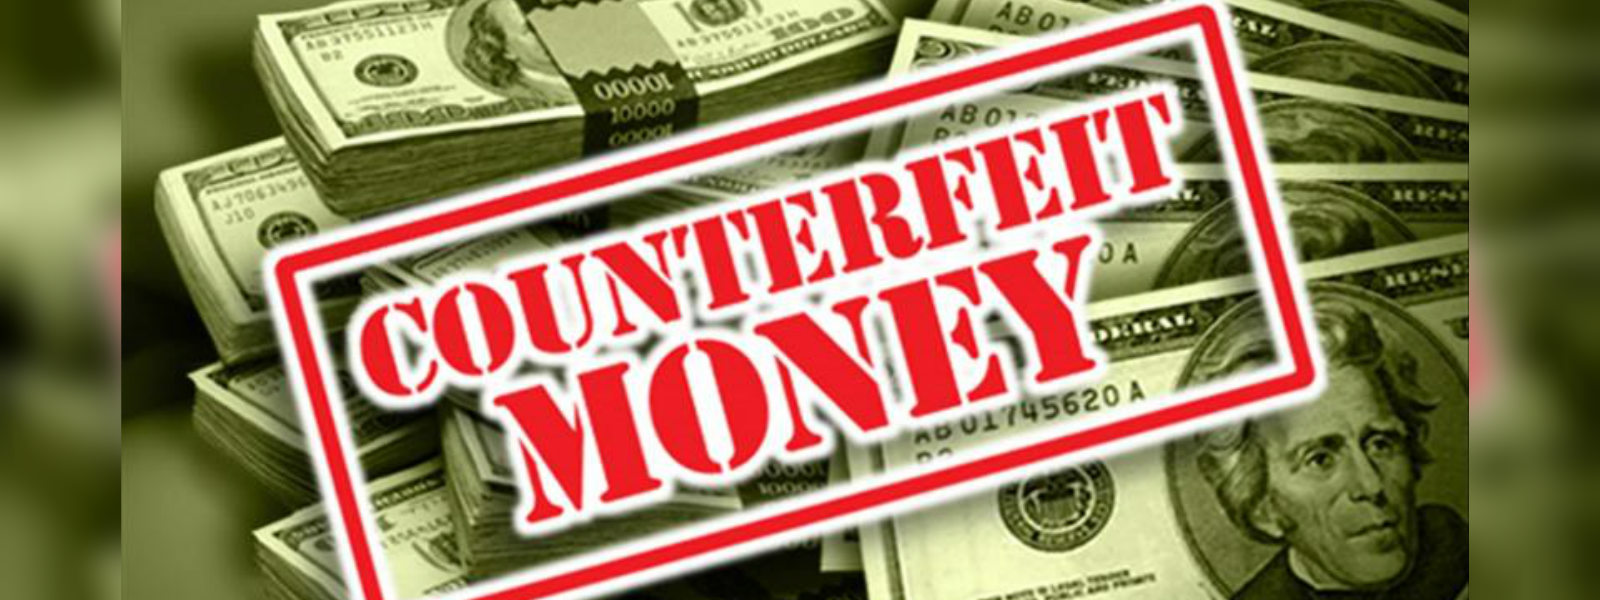 2 arrested for possession of 70 counterfeit notes